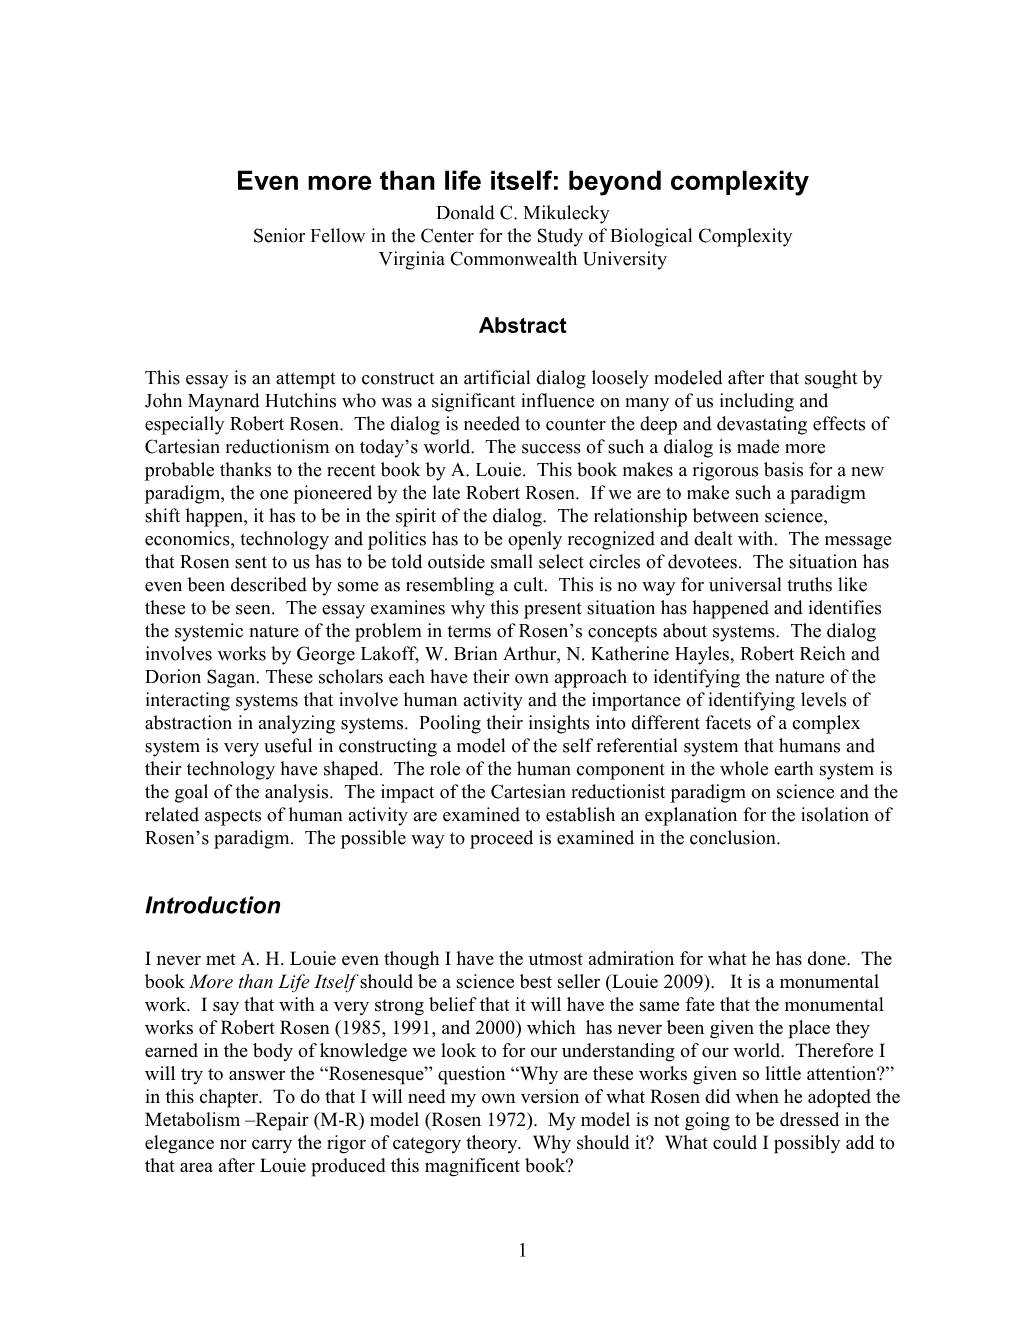 Even More Than Life Itself: Beyond Complexity